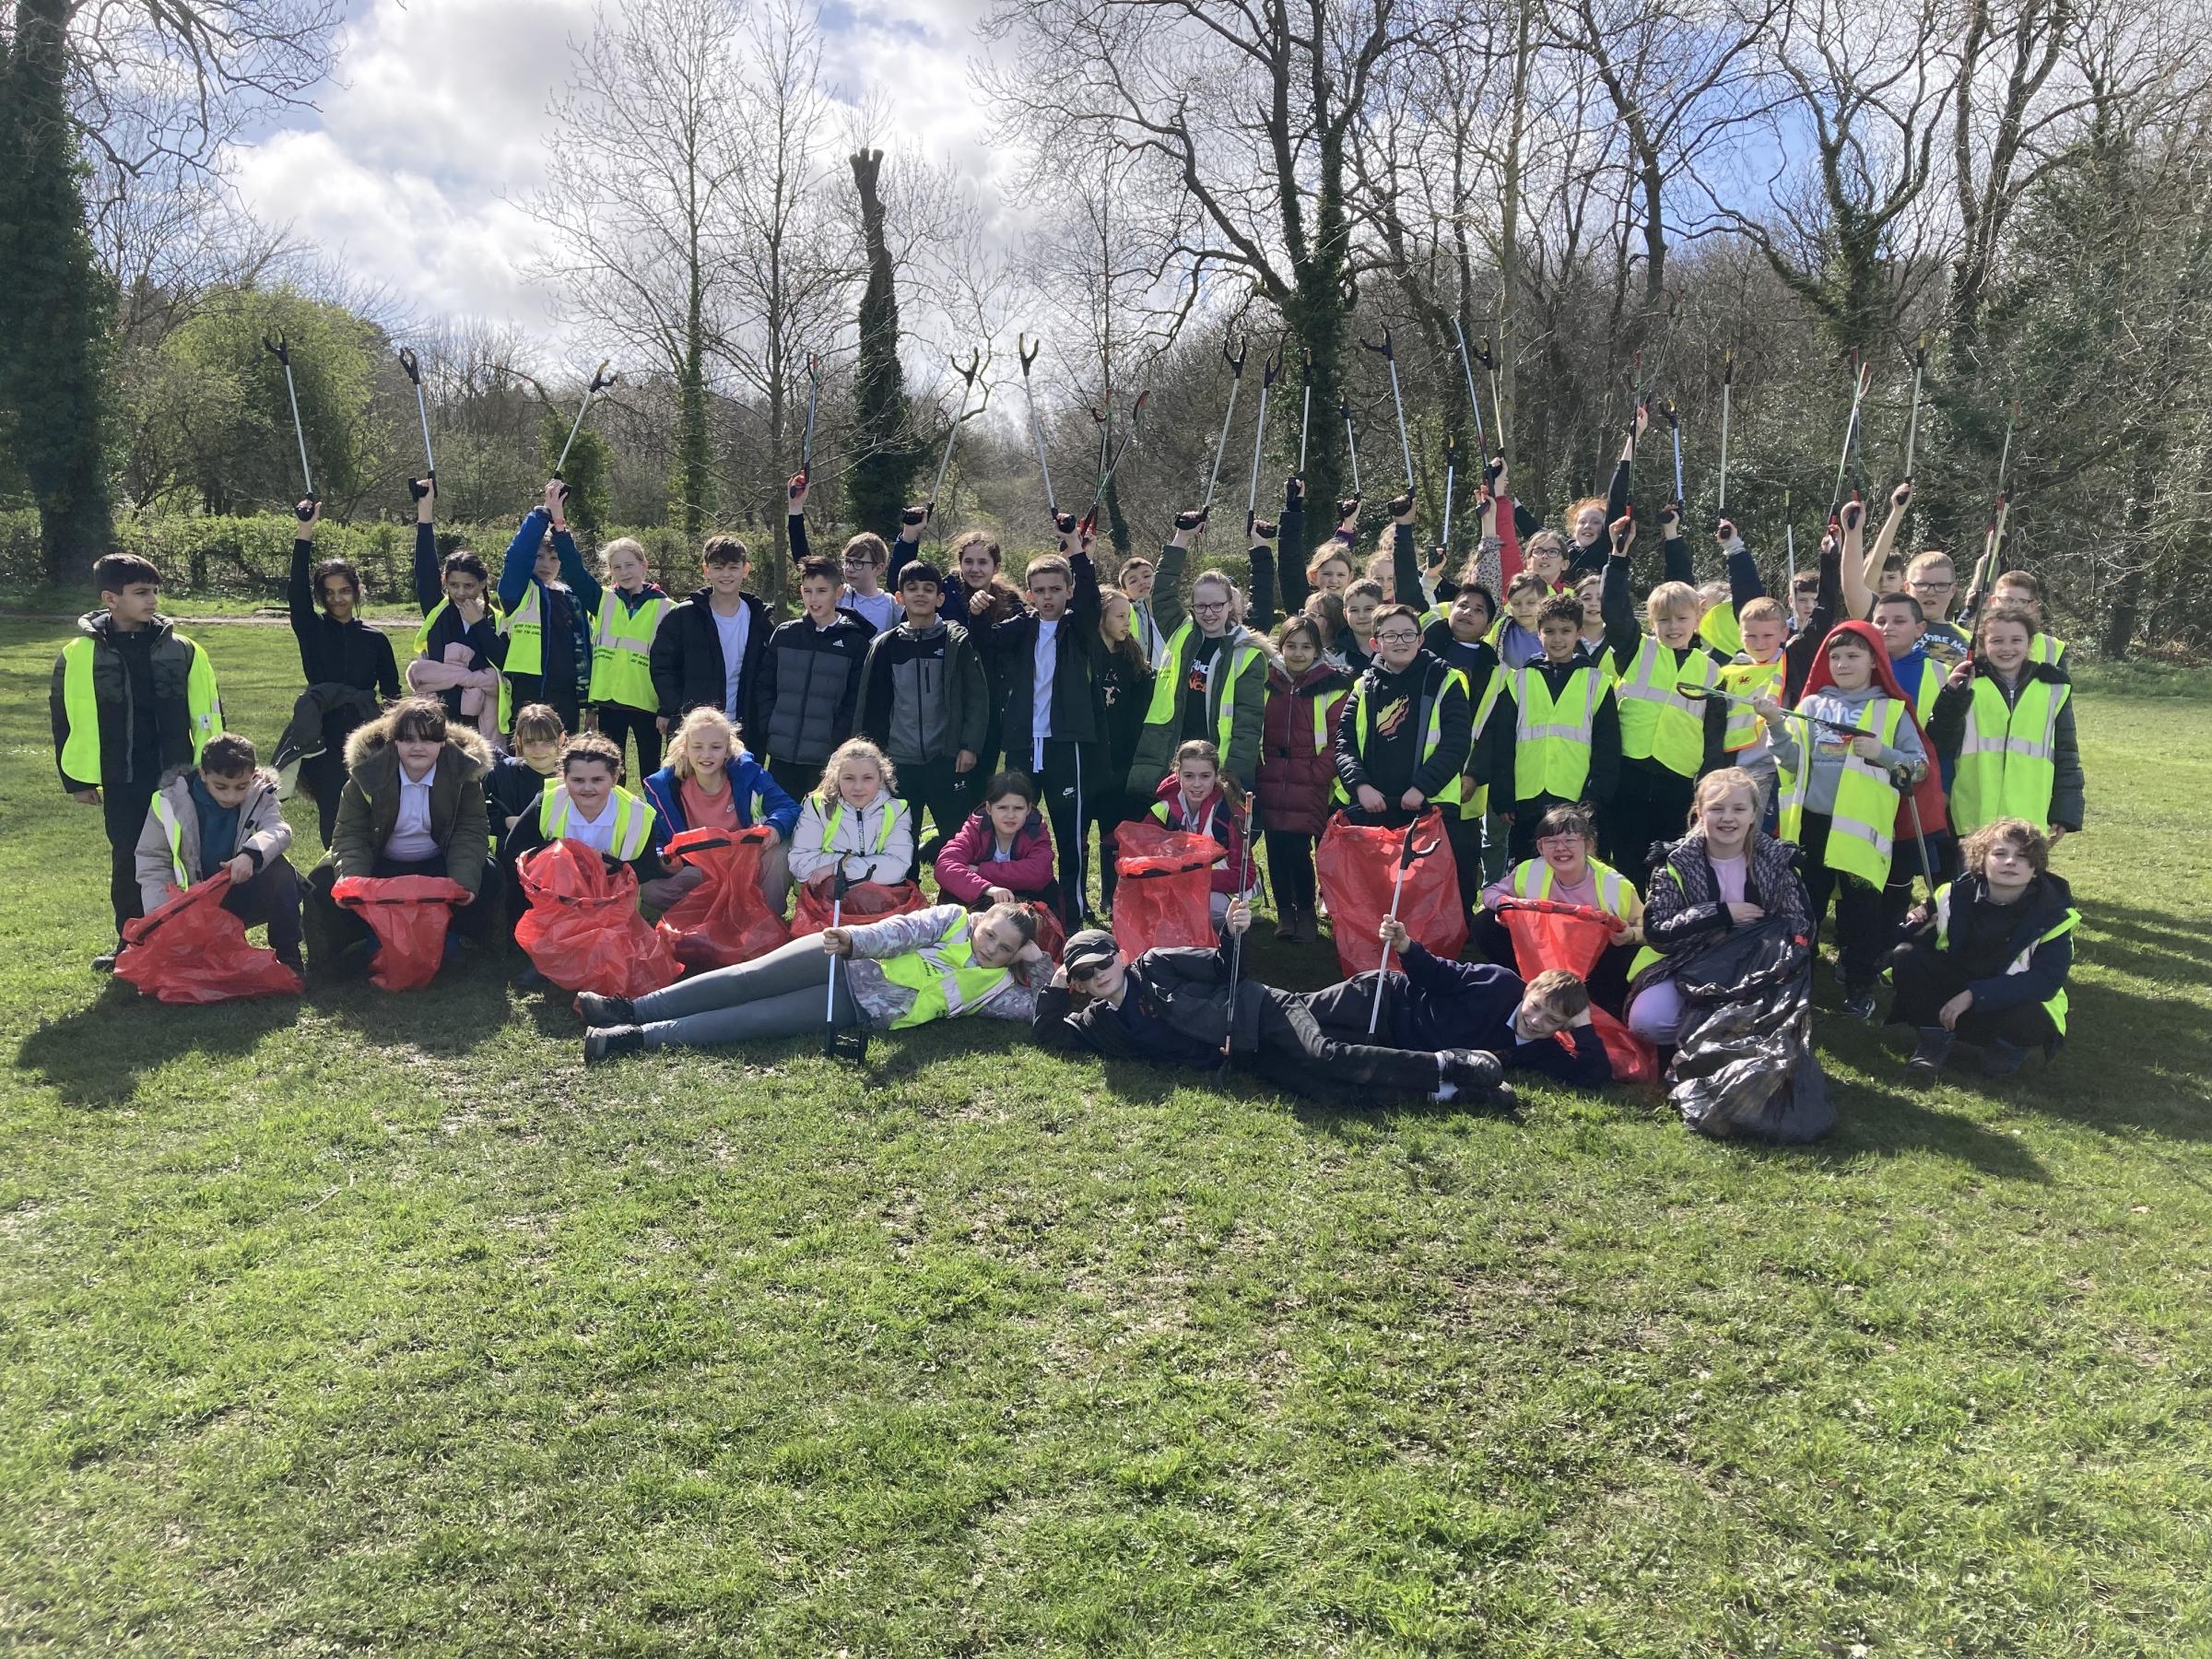 Litterpick in the community for pupils at Ysgol Ty Ffynnon.